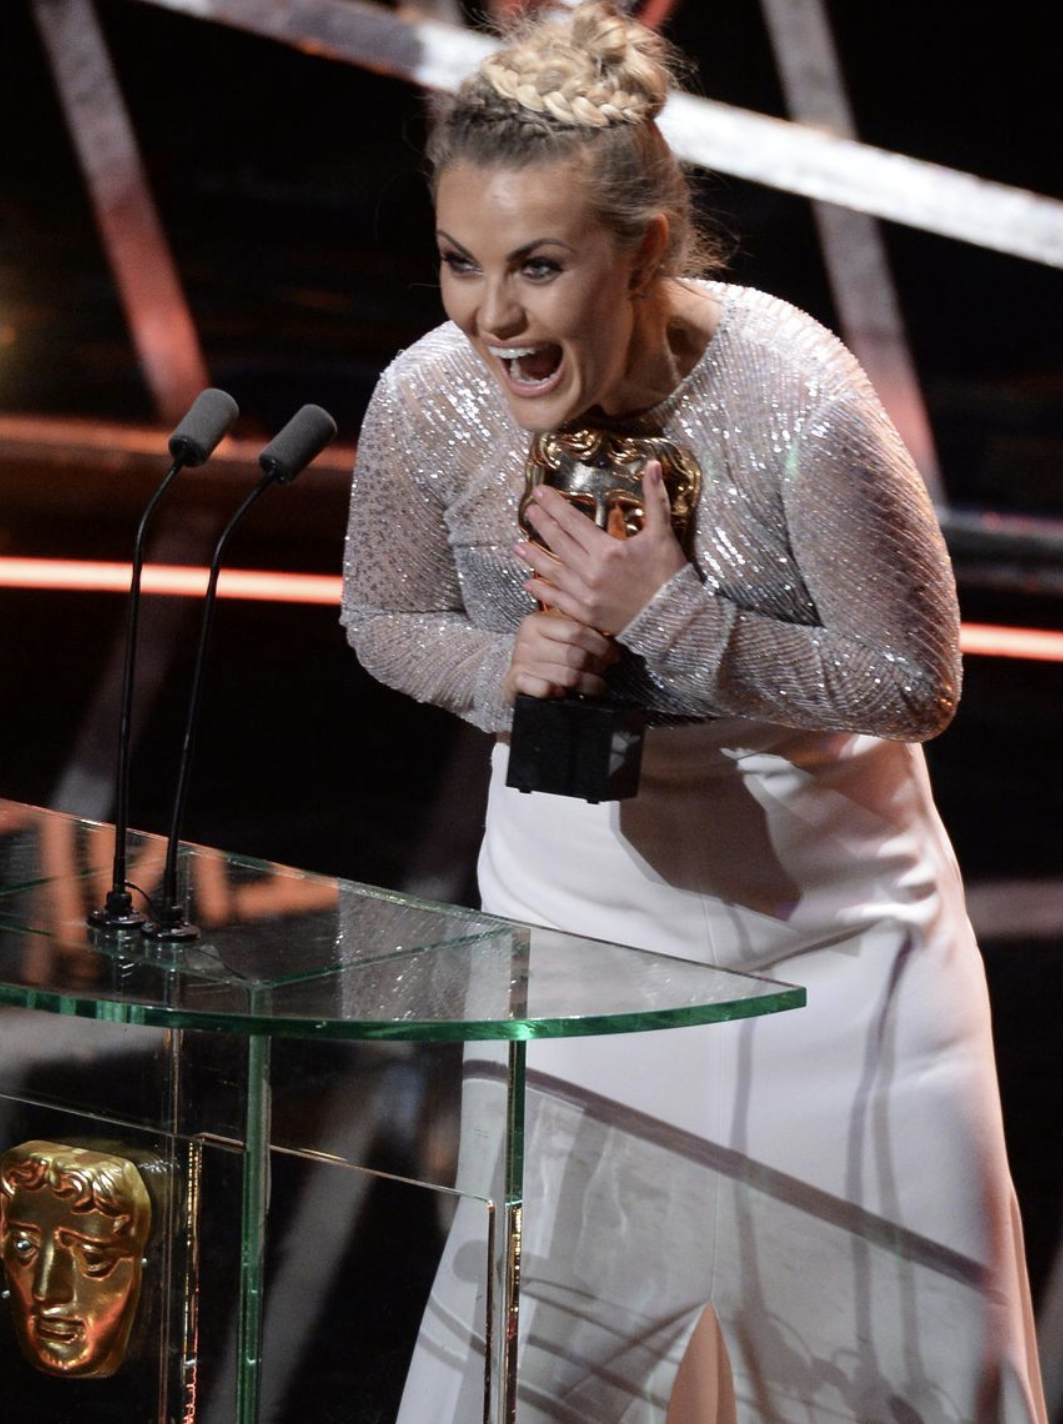 Chanel Cresswell during her BAFTA winning moment of 2016